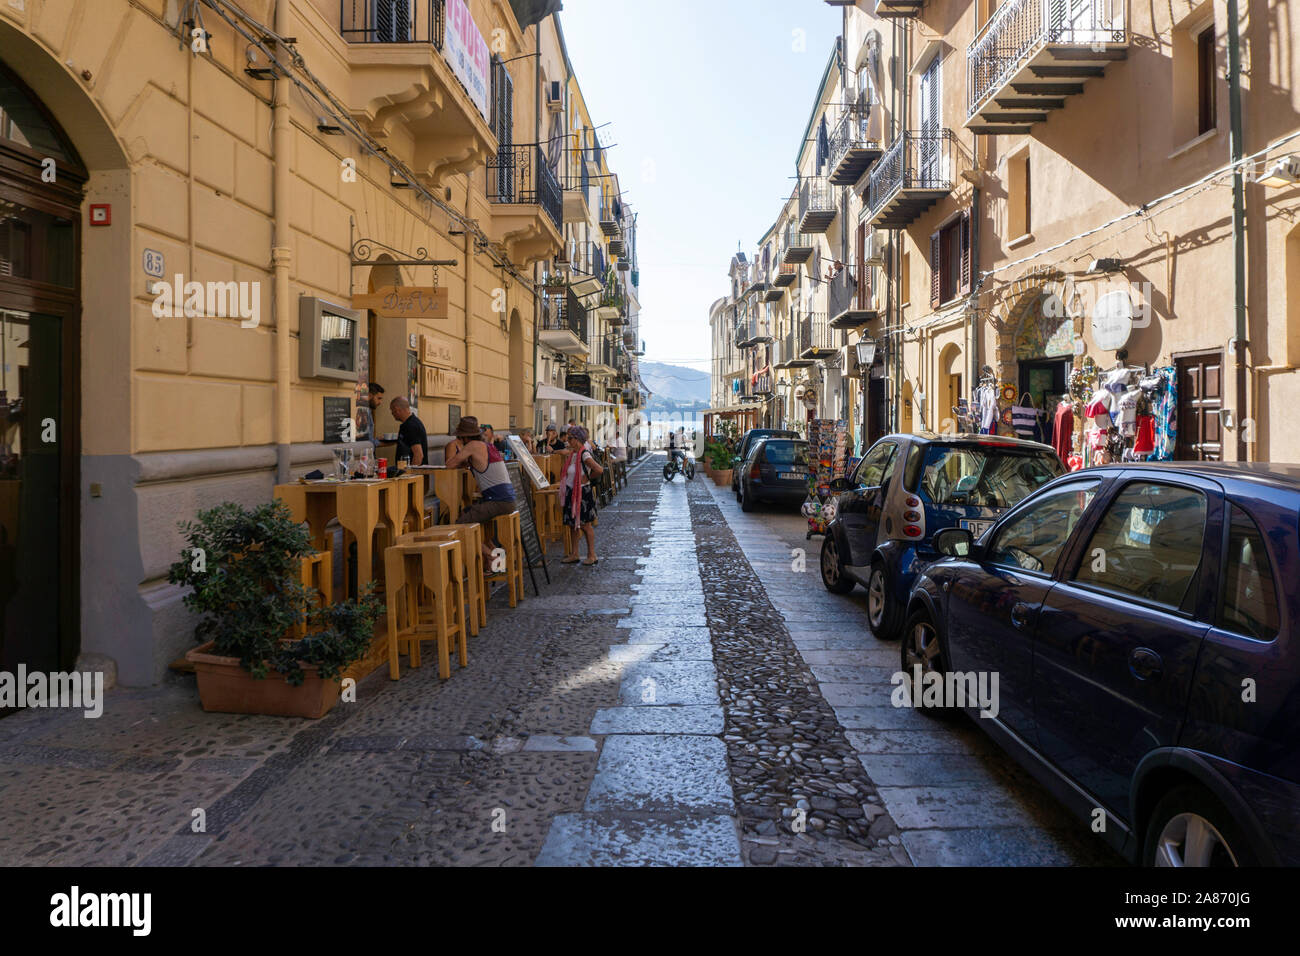 Outdoor dining in Cefalú, Sicily, Italy, The town has many side streets full of bars and restaurants., Stock Photo